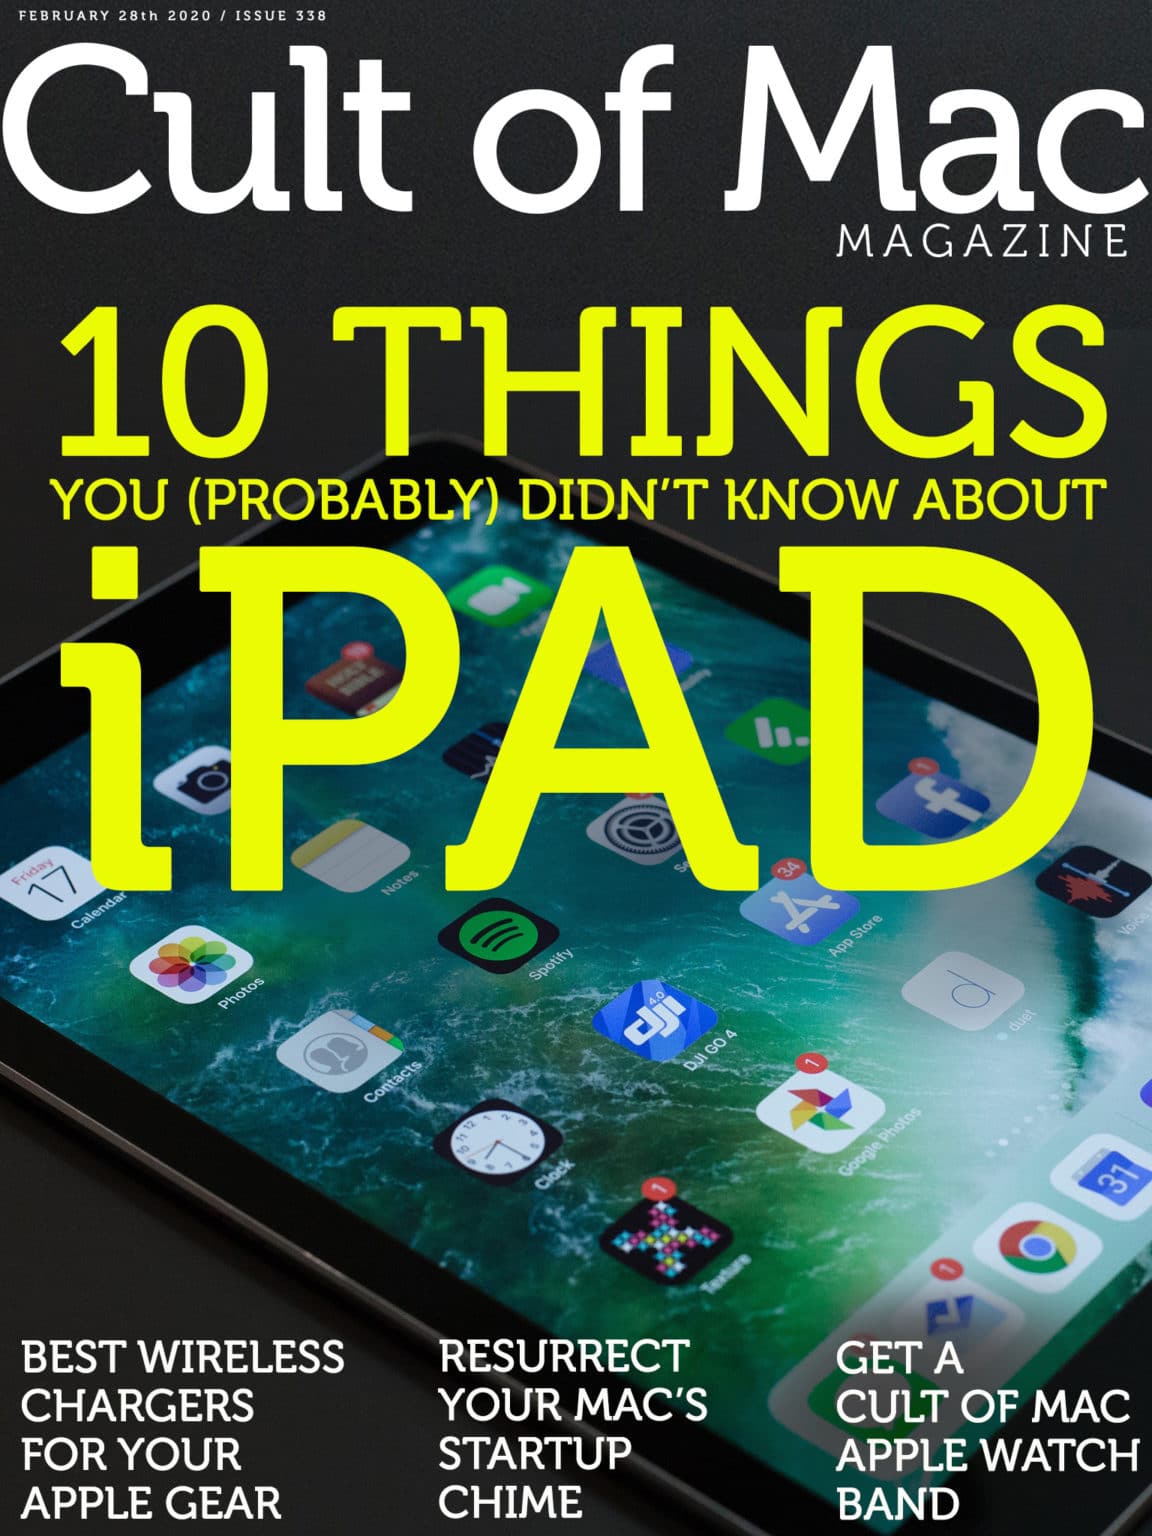 iPad trivia: 10 things you didn't know.